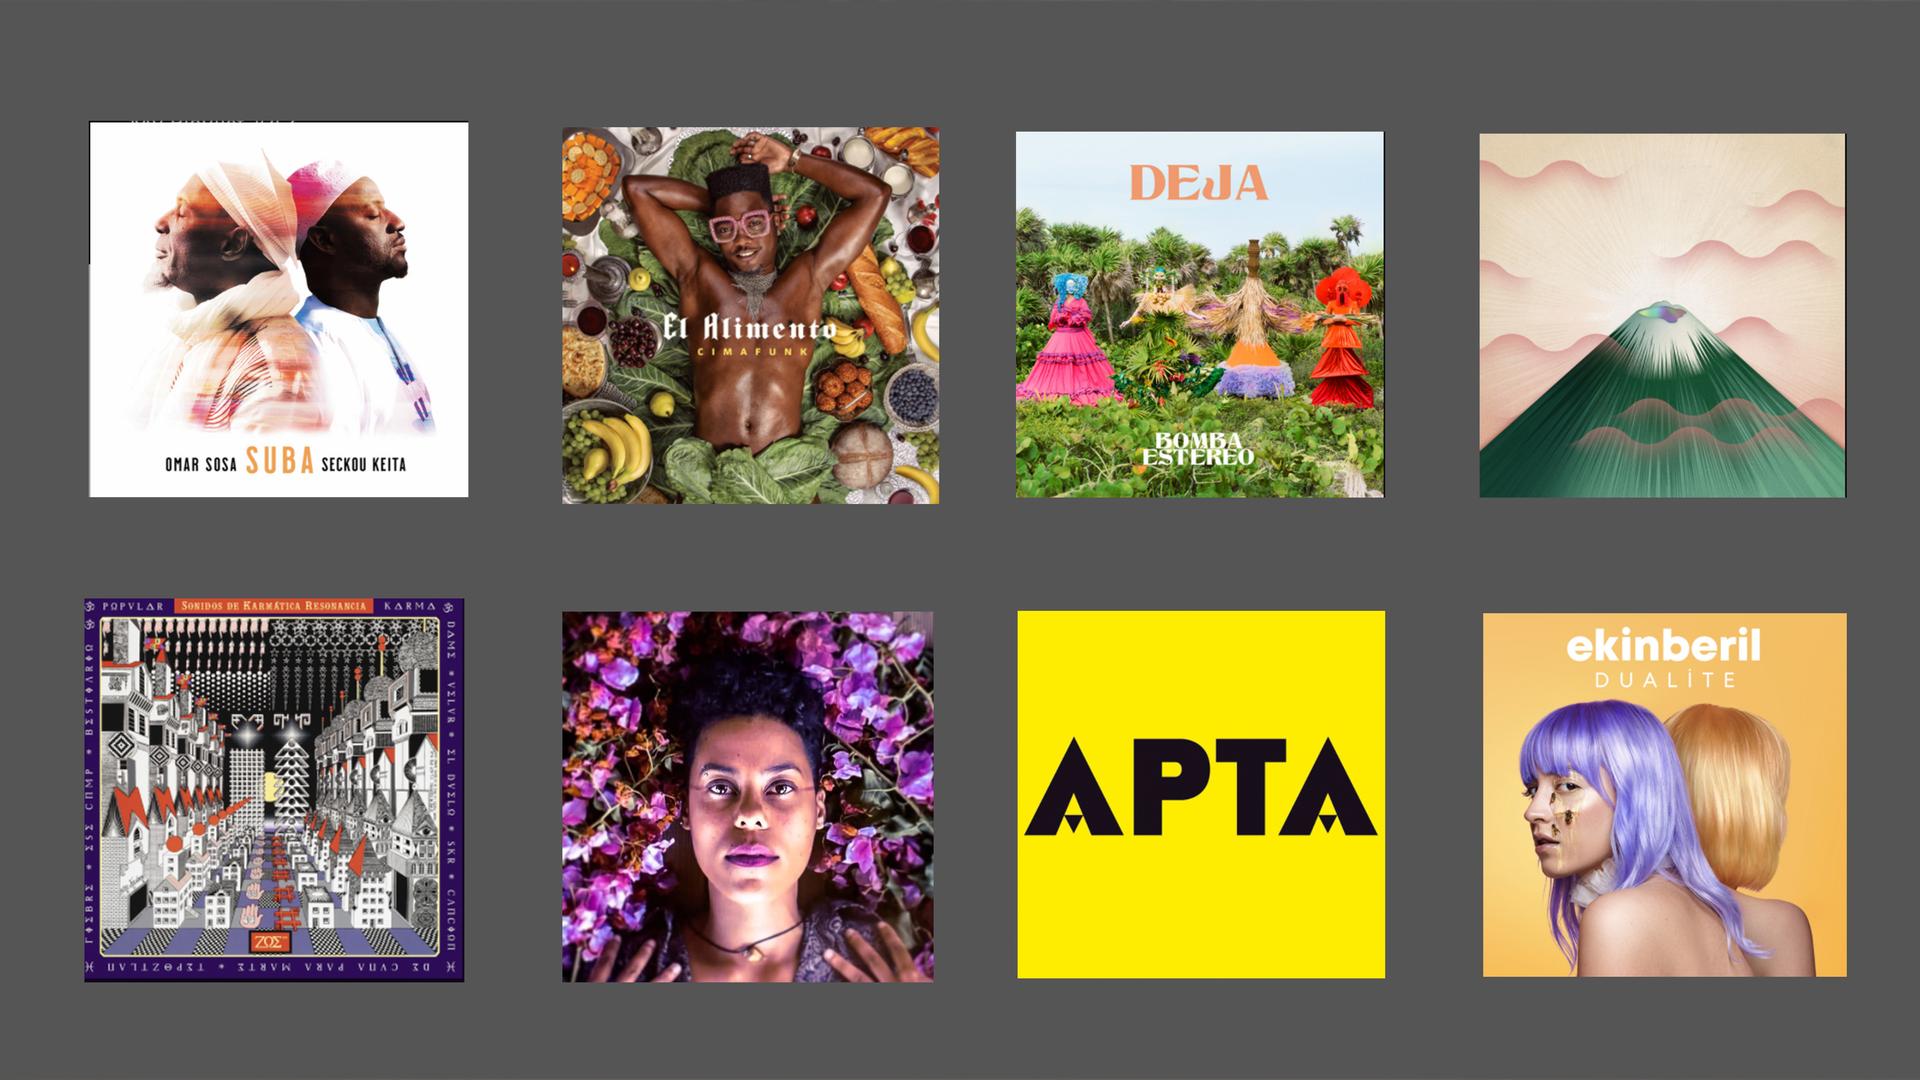 Cover art for albums of multiple artists included on The World's 2021 music playlist. Clockwise, starting from the top left image: 'Suba' by Omar Sosa and Seckou Keita; 'El Alimento' by Cimafunk; 'Deja' by Bomba Estereo; 'Seeking New Gods' by Gruff Rhys; 